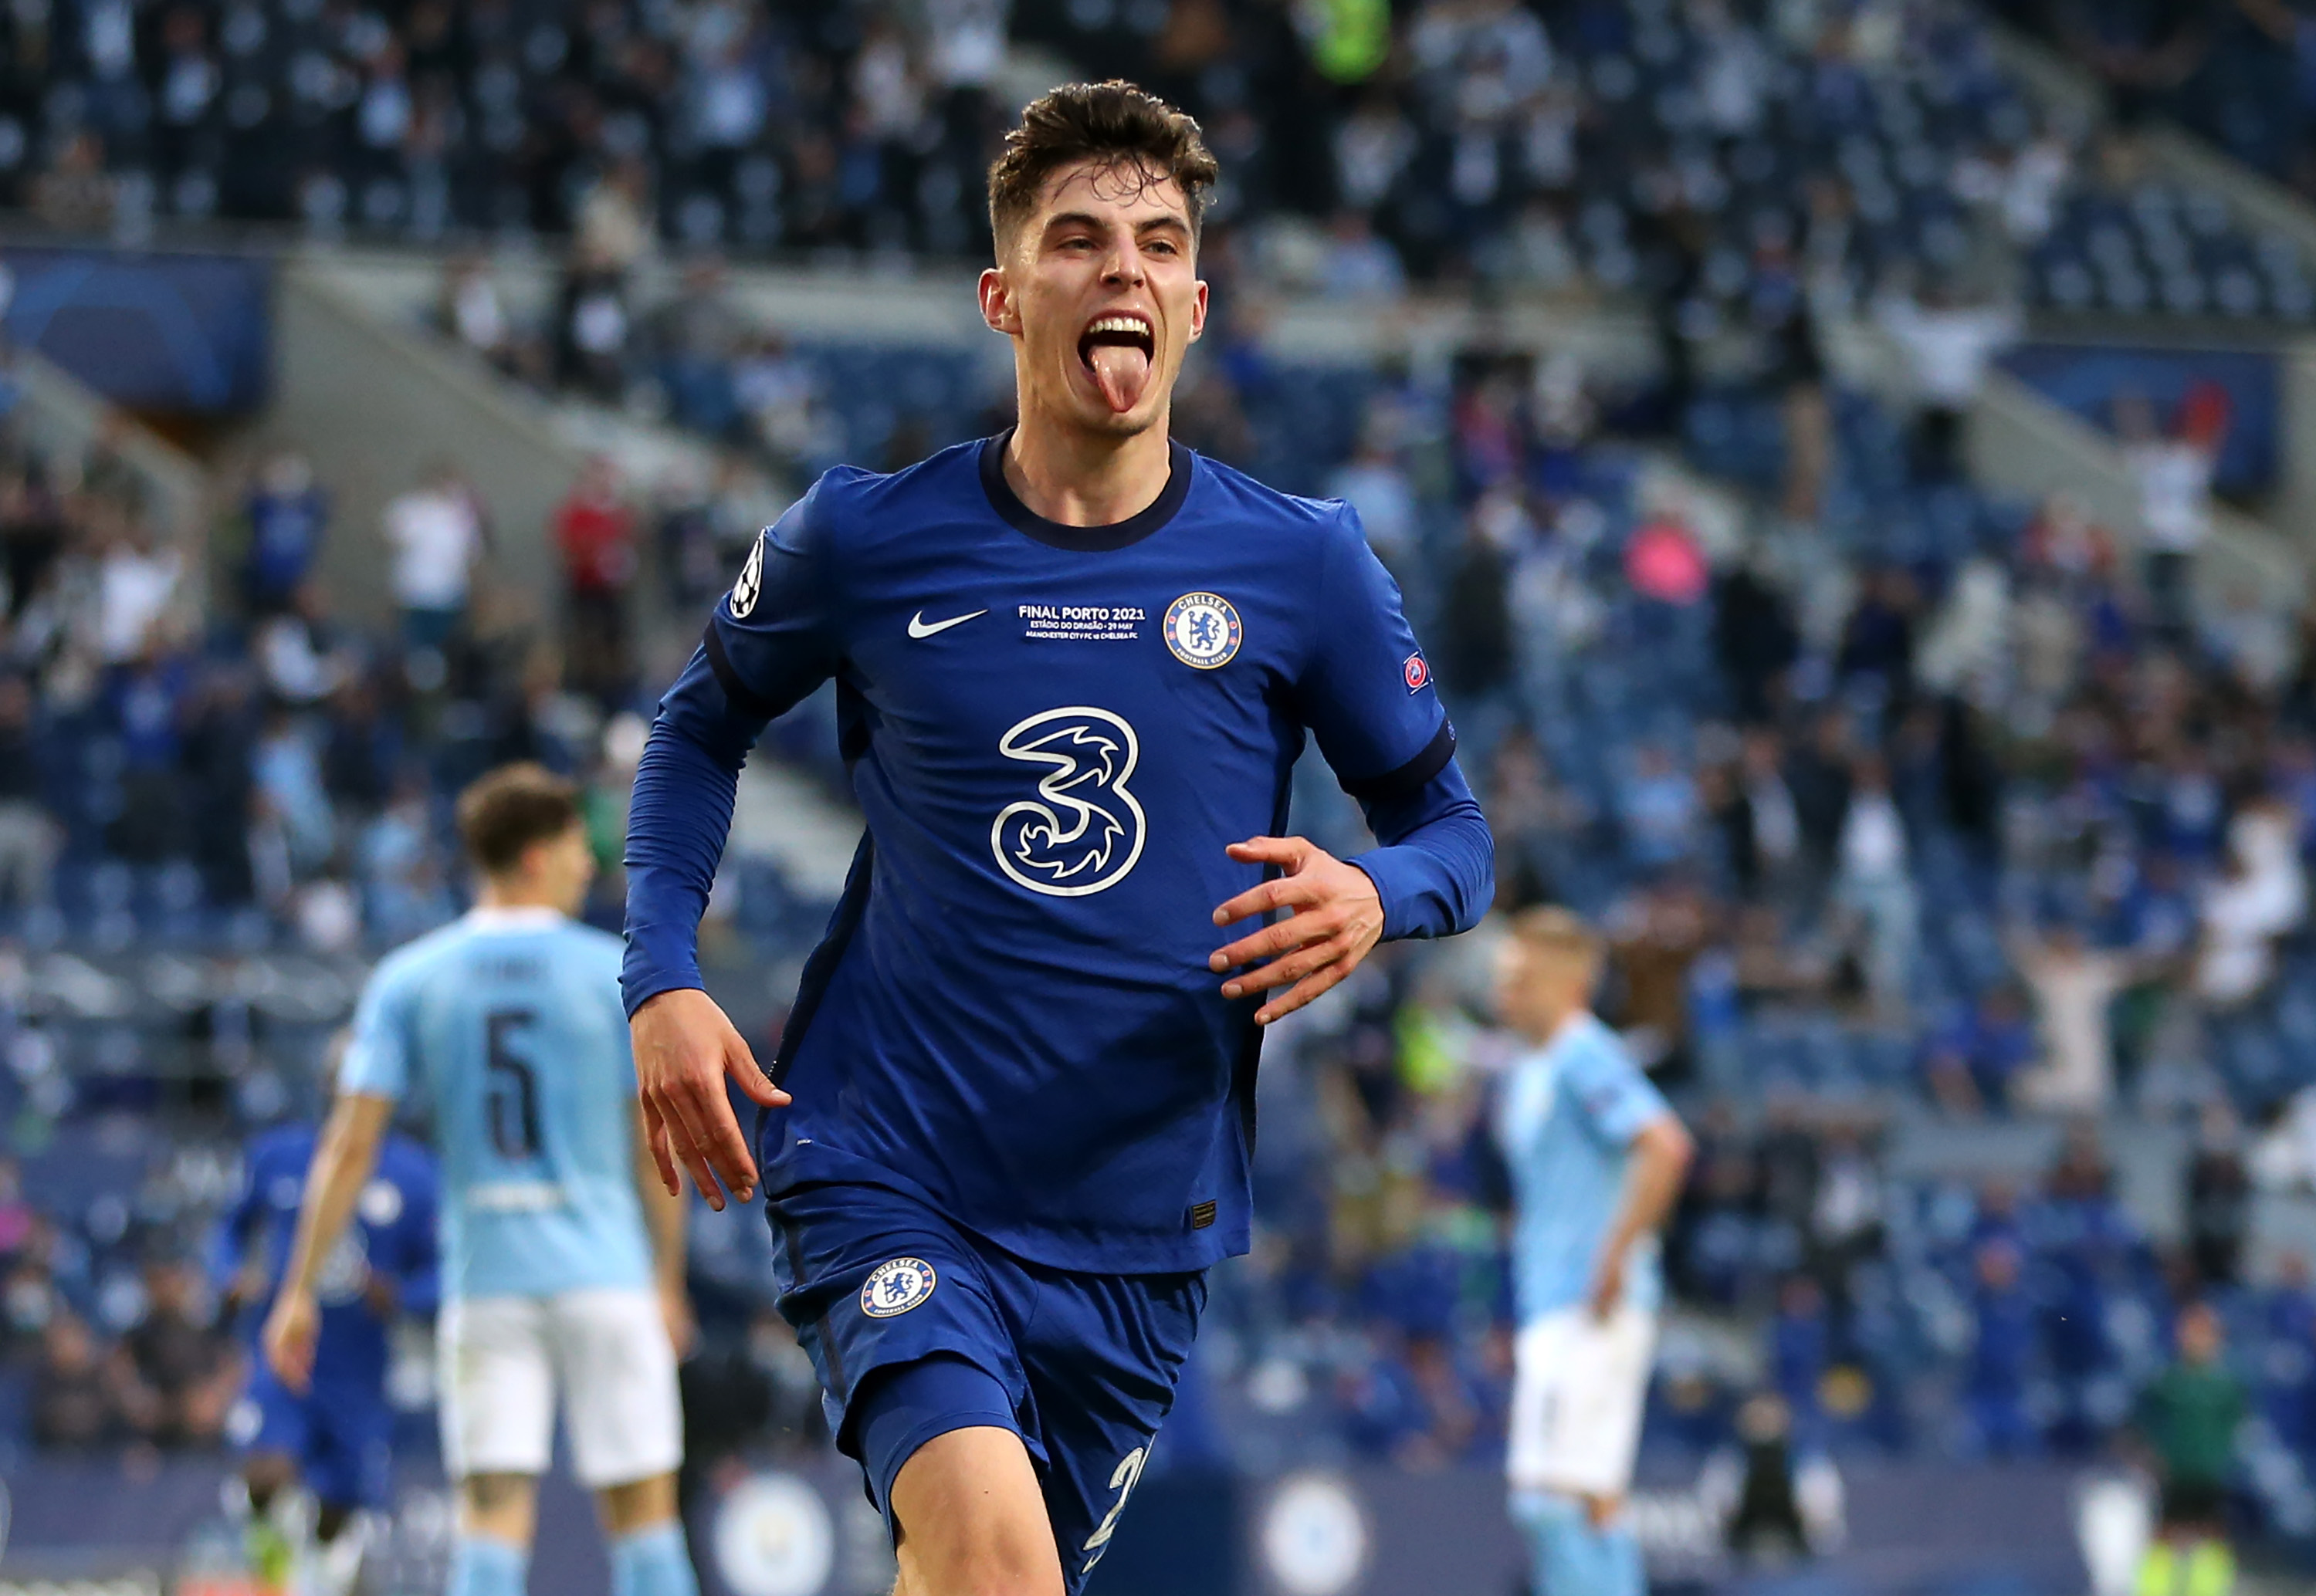 Havertz scored one of the most important goals in the Blues' history in the 2021 Champions League final